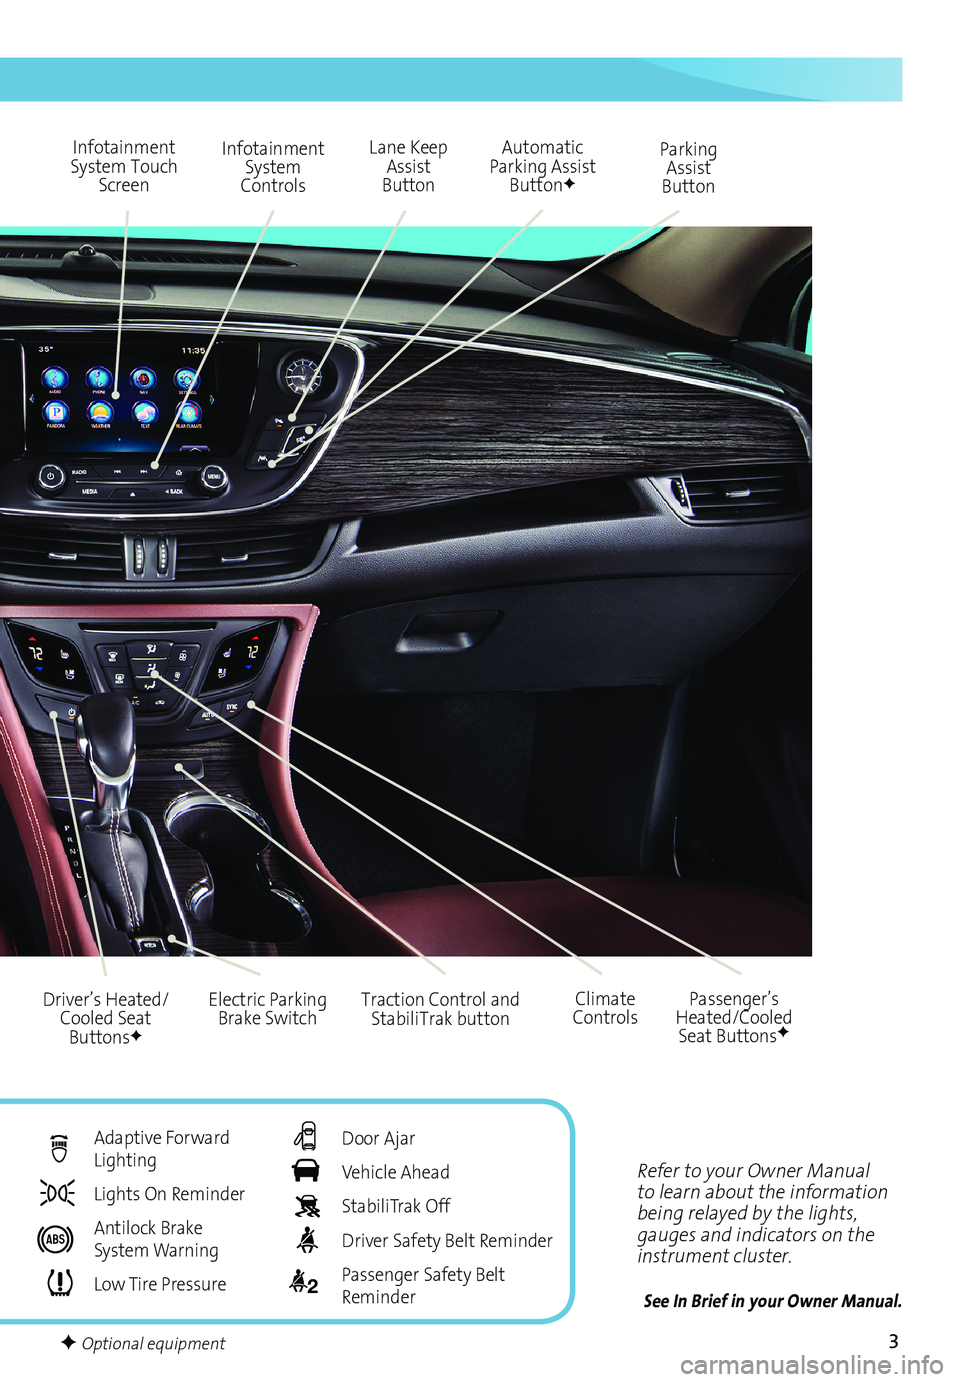 BUICK ENVISION 2016  Get To Know Guide 3
Refer to your Owner Manual 
to learn about the information 
being relayed by the lights, 
gauges and indicators on the 
instrument cluster.
See In Brief in your Owner Manual.
Infotainment 
System To